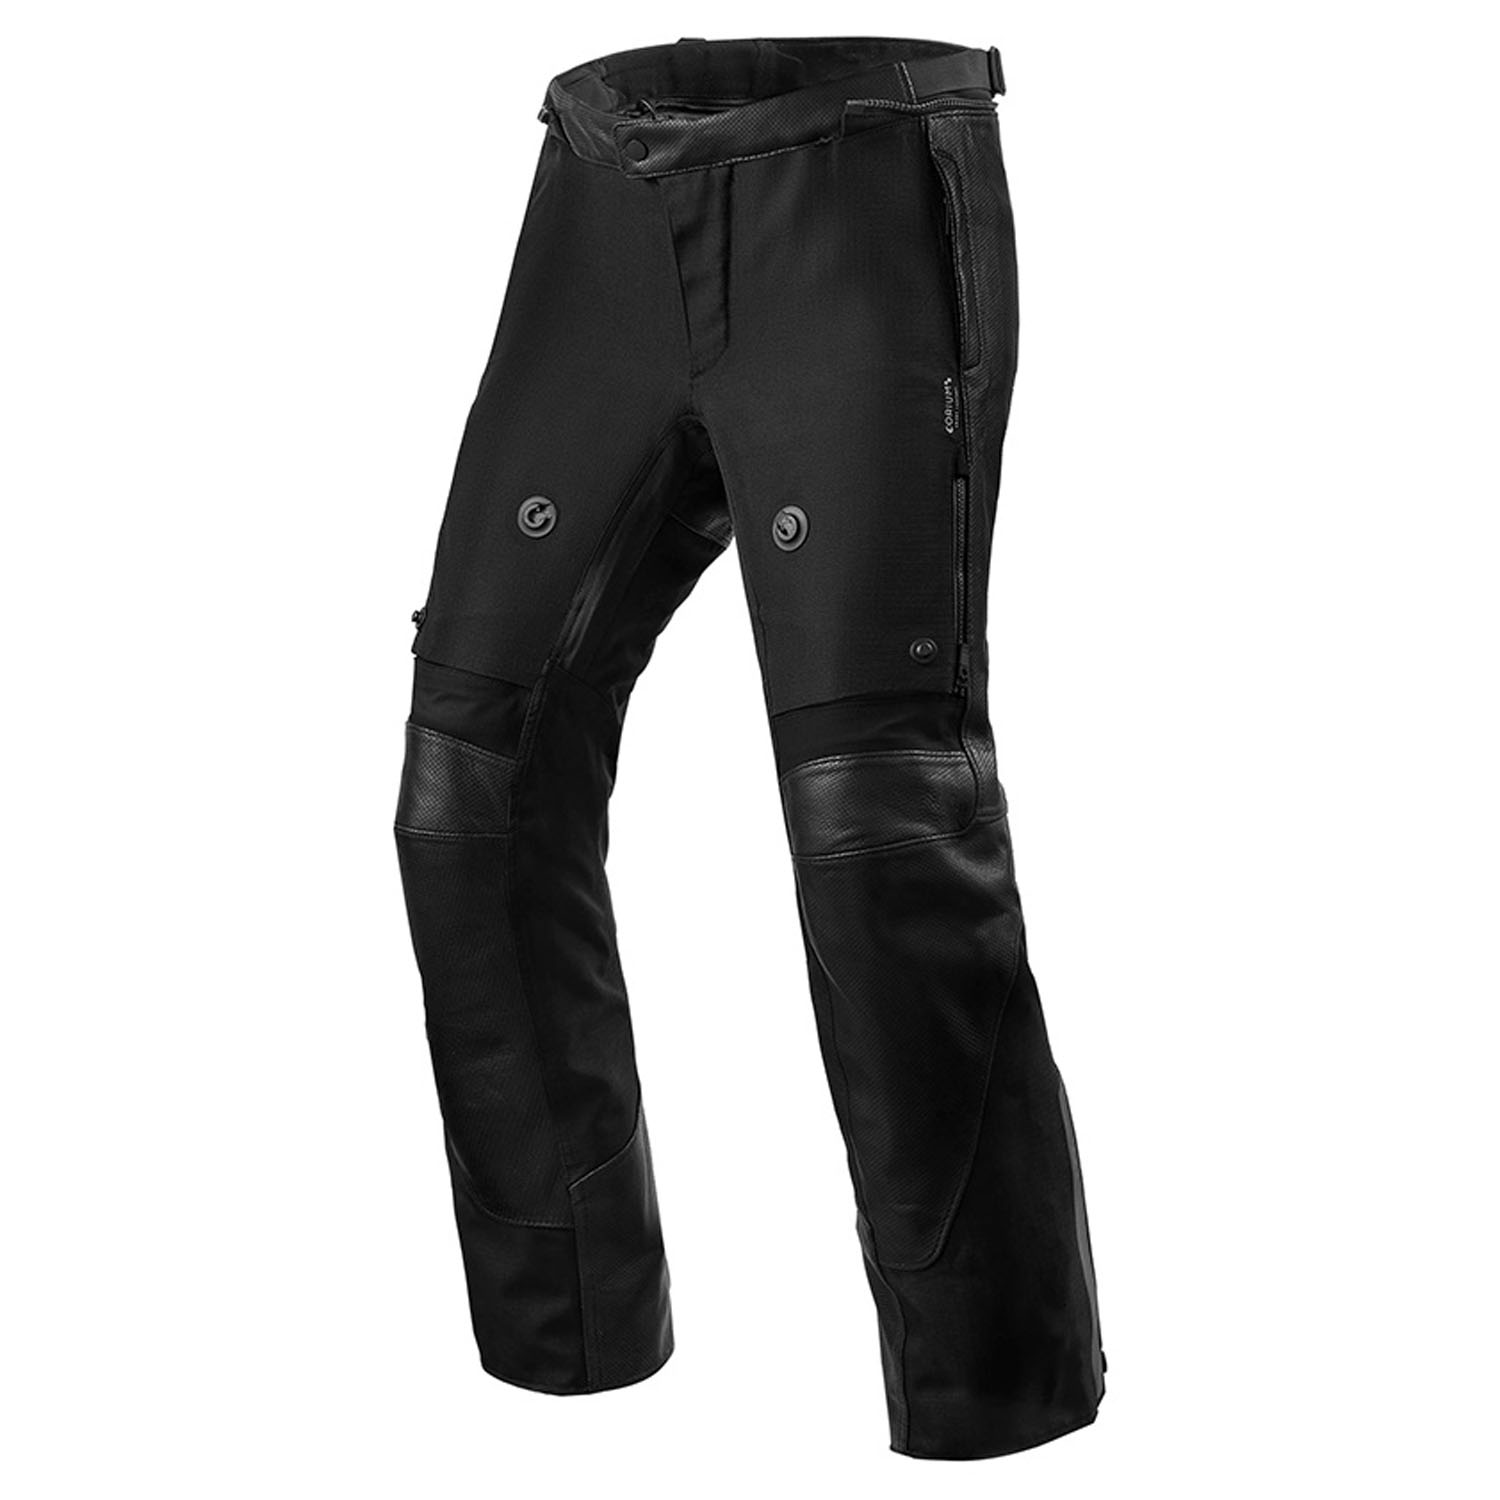 Image of EU REV'IT! Trousers Valve H2O Black Short Motorcycle Pants Taille 50